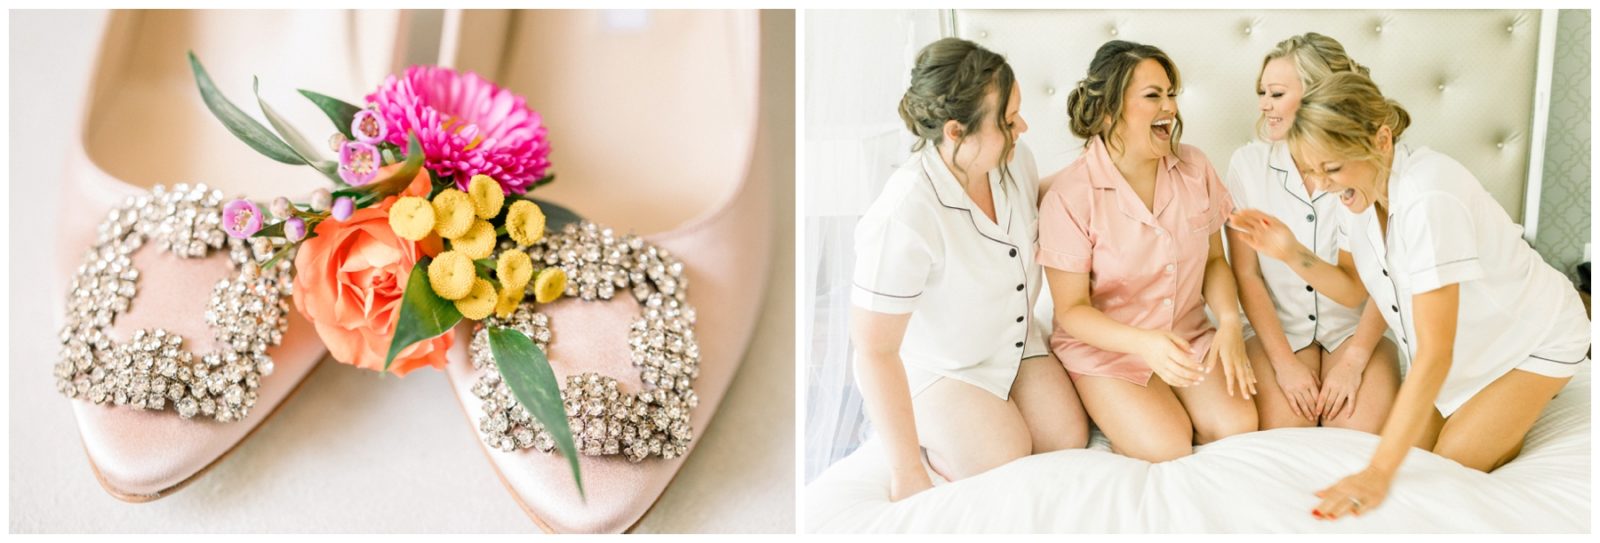 Wayzata Wedding Photographer takes pictures of bride with bridesmaids and shoes.